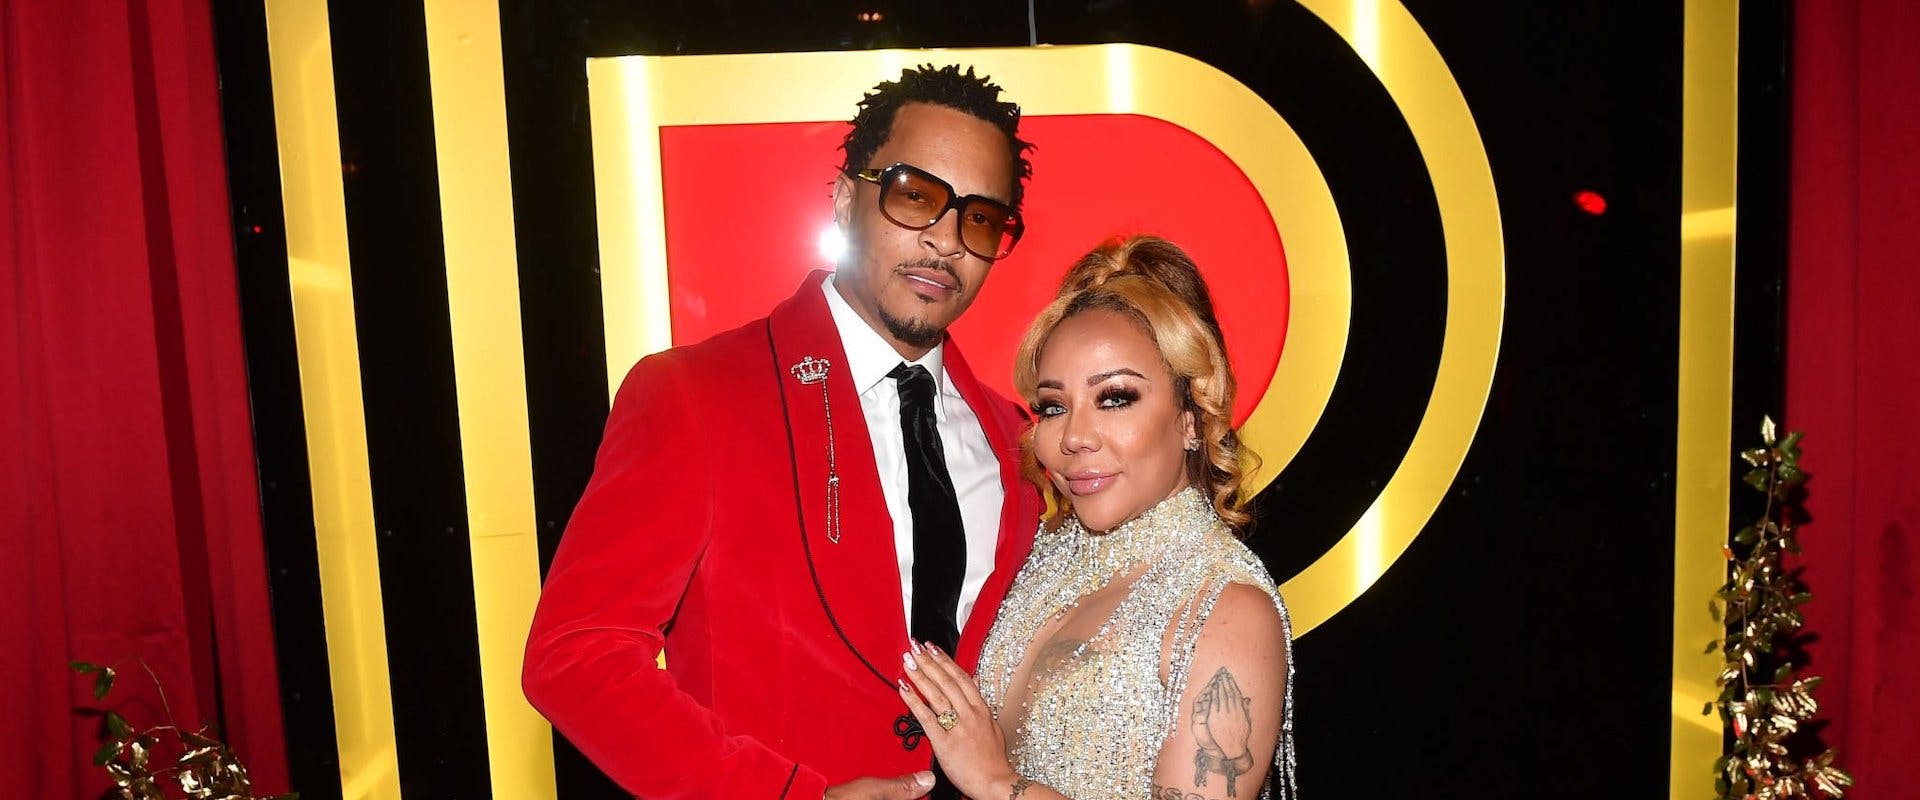 Rapper T.I. and Tameka "Tiny" Harris attend Black Tie Affair For Quality Control's CEO Pierre "Pee" Thomas on June 02, 2021 at Fox Theater in Atlanta, Georgia. (Photo by Paras Griffin/Getty Images)